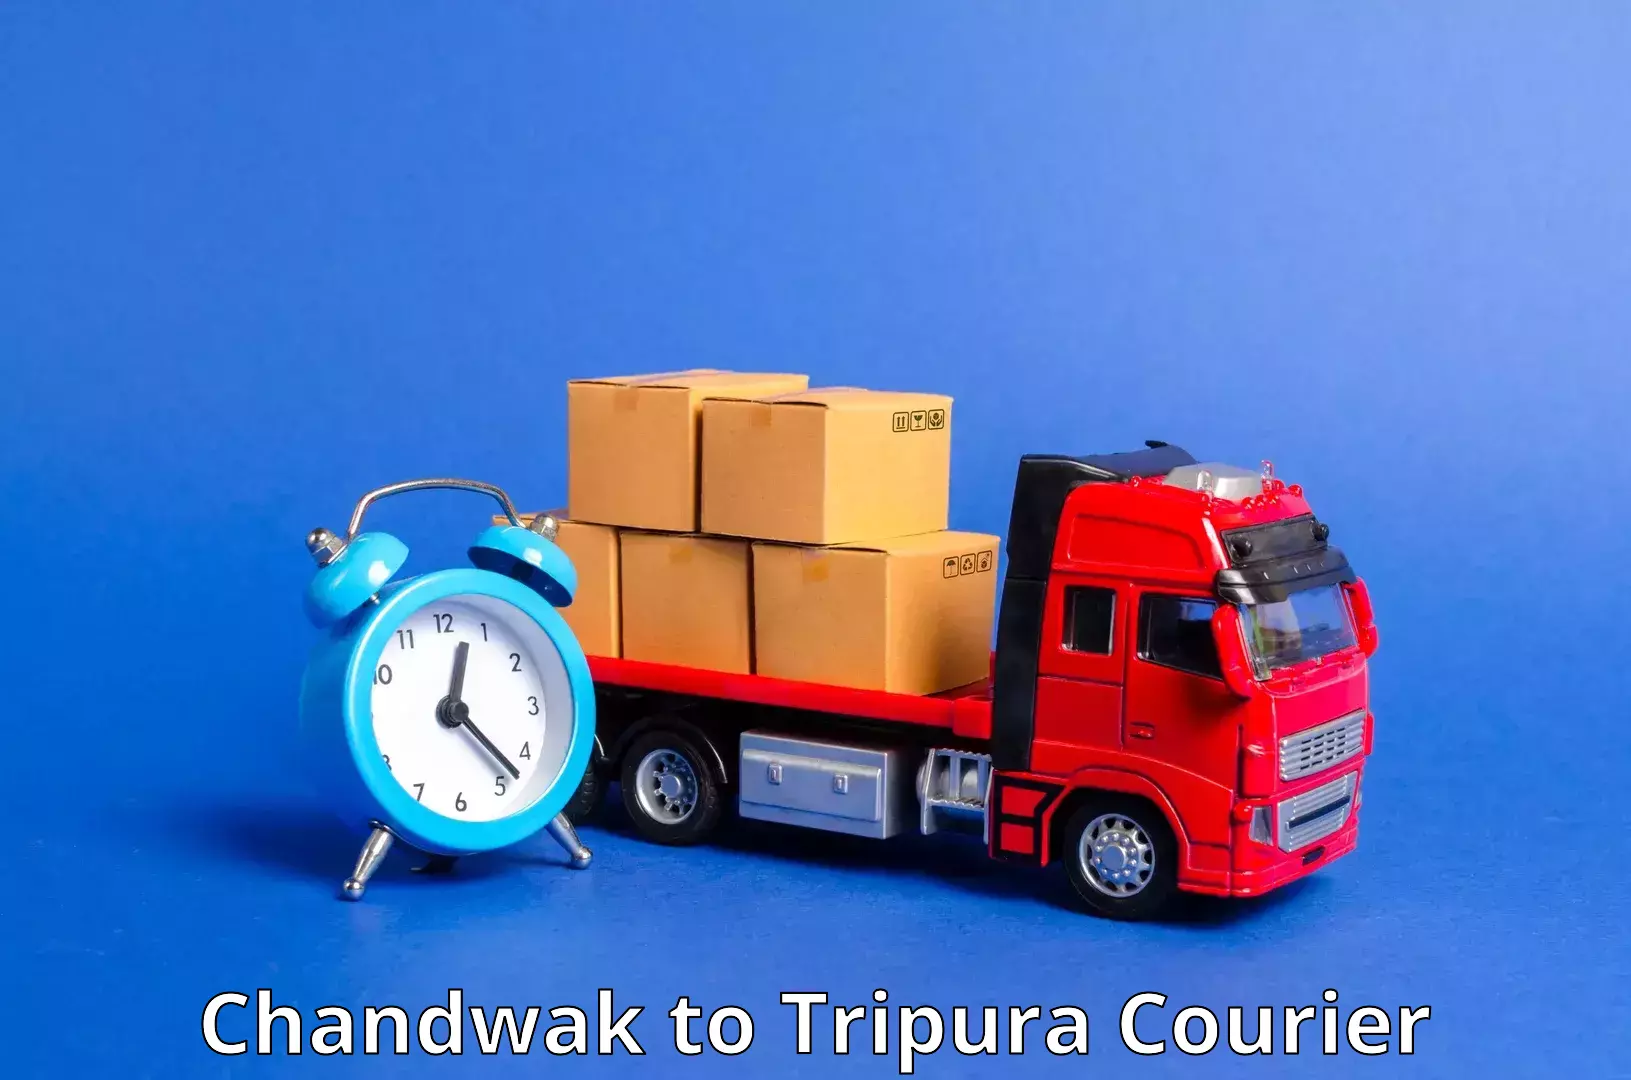 Quality courier services Chandwak to Udaipur Tripura